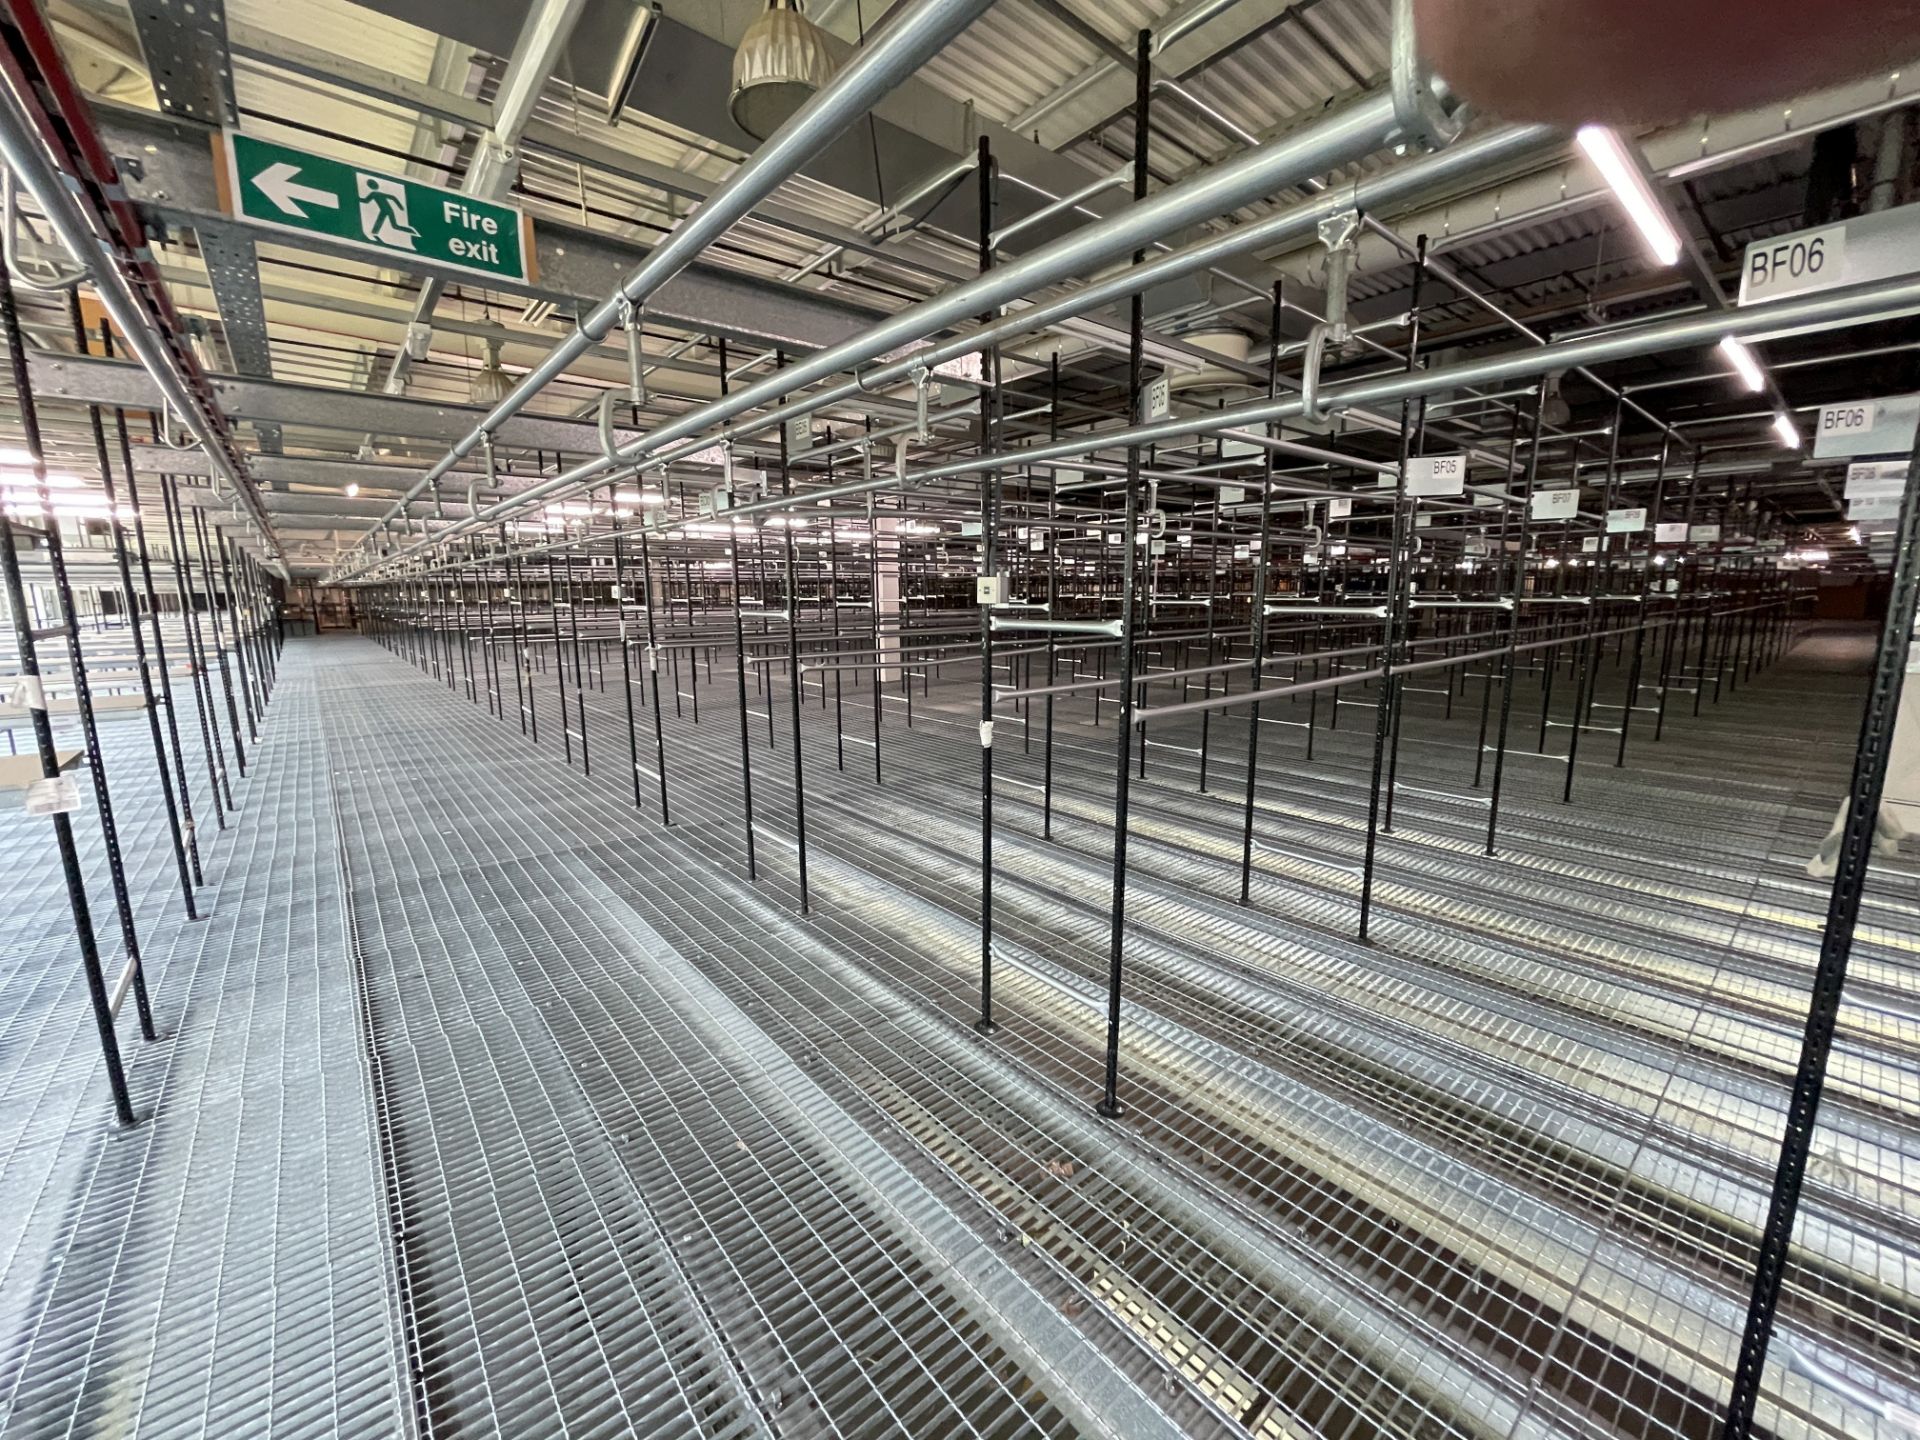 BOLTLESS STEEL SUSPENDED GARMENT STORAGE RACKING (on top of mezzanine floor), comprising approx. - Image 2 of 9